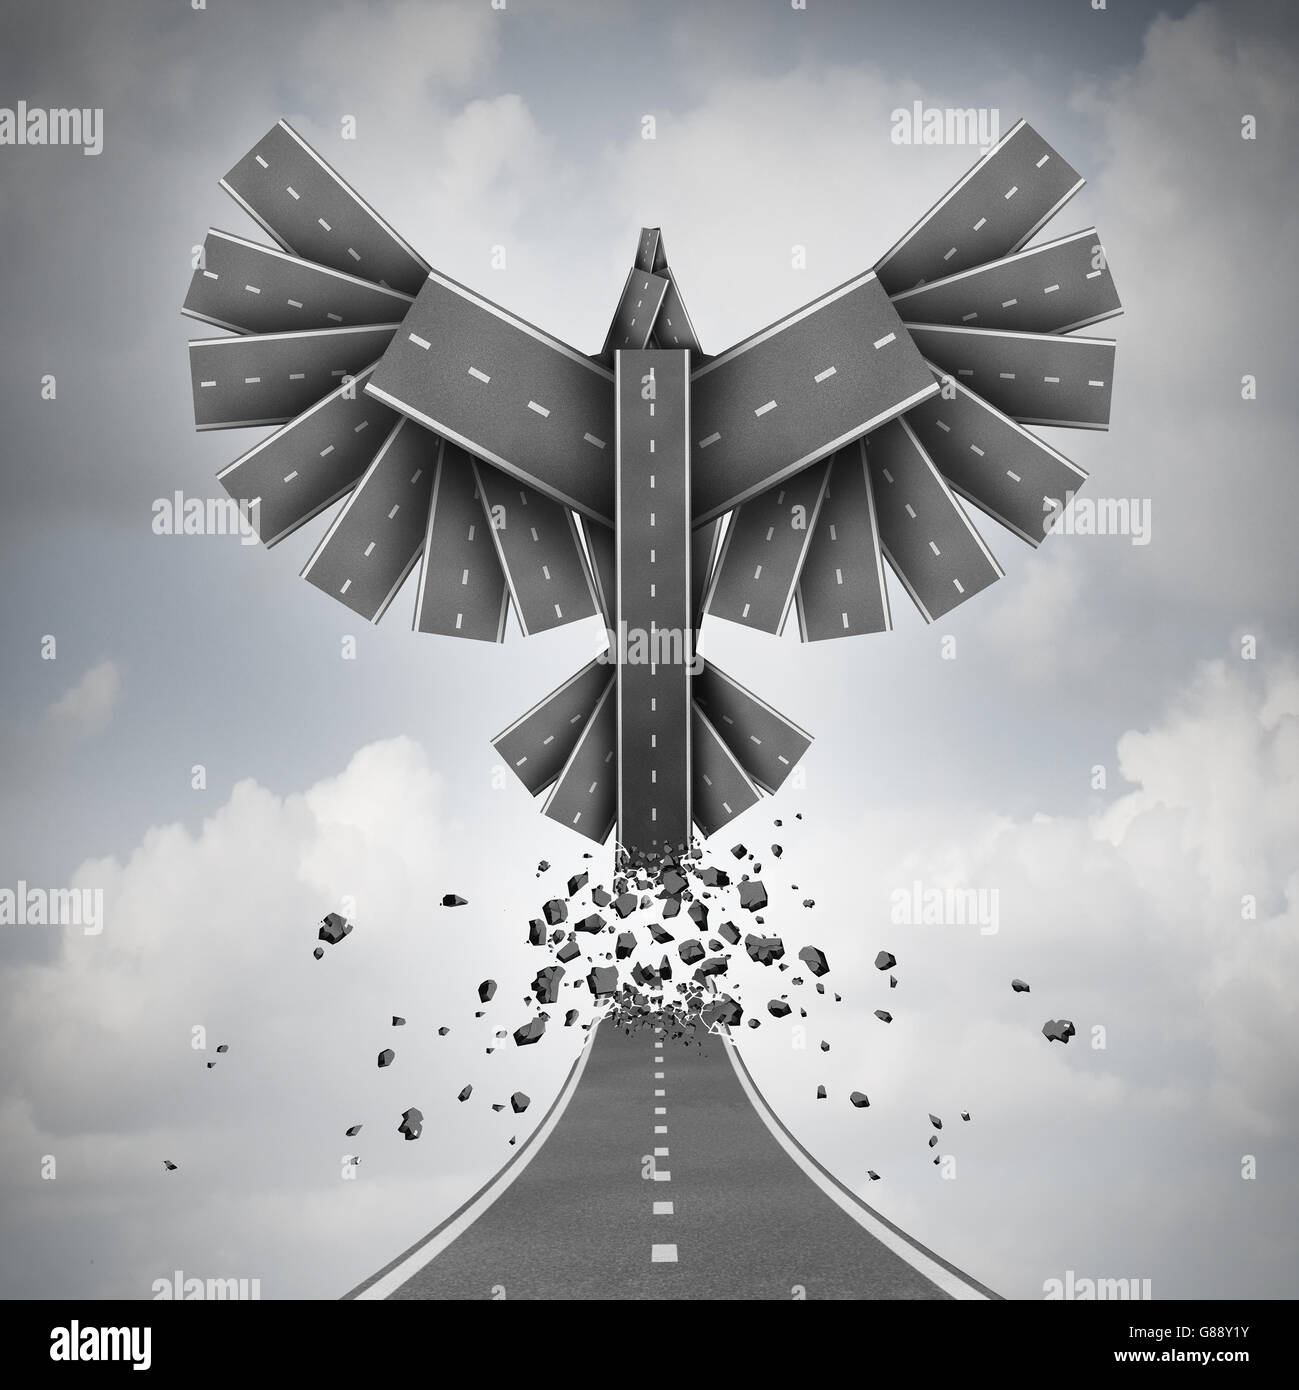 Start up or startup business progress concept as a new company or corporate venture metaphor of success potential as a path or street tranforming into flying wings of opportunity as a 3D illustration. Stock Photo